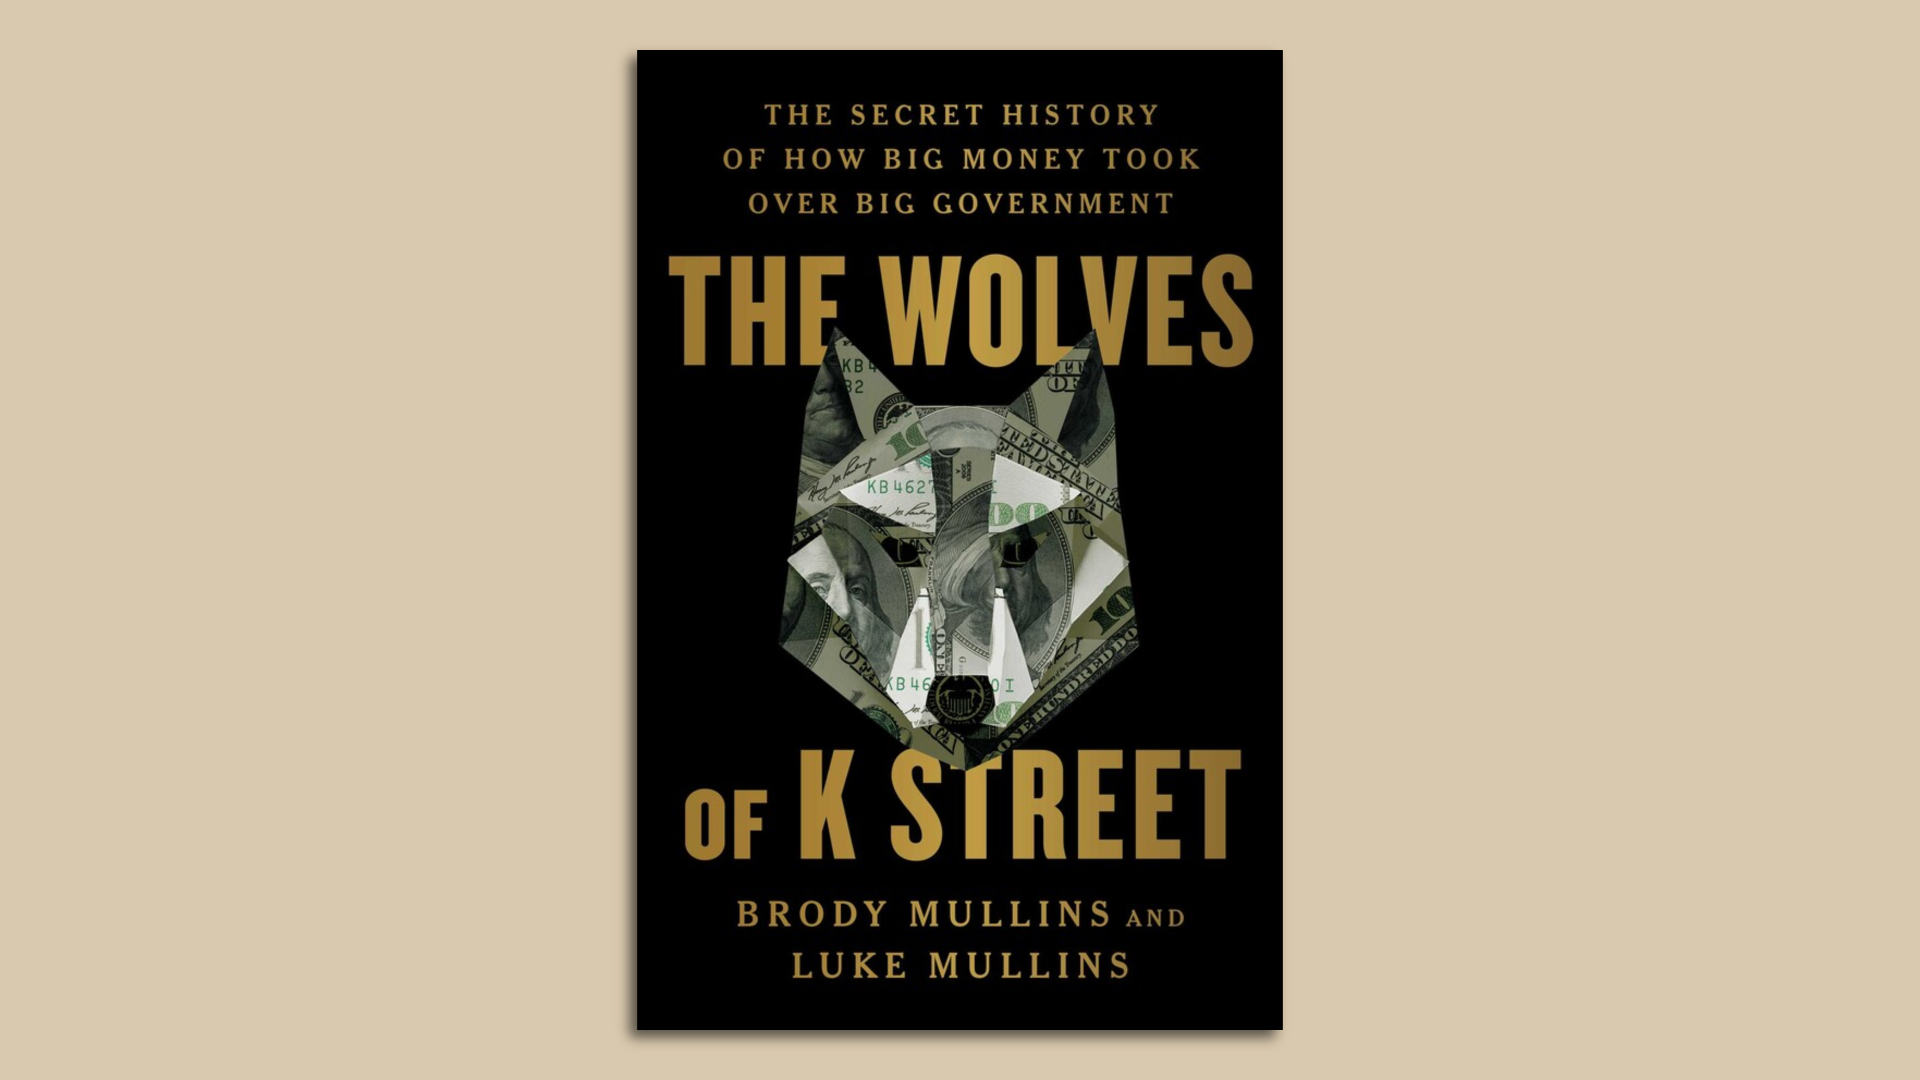 "The Wolves of K Street" book cover, with a wolf head animated with dollar bills.